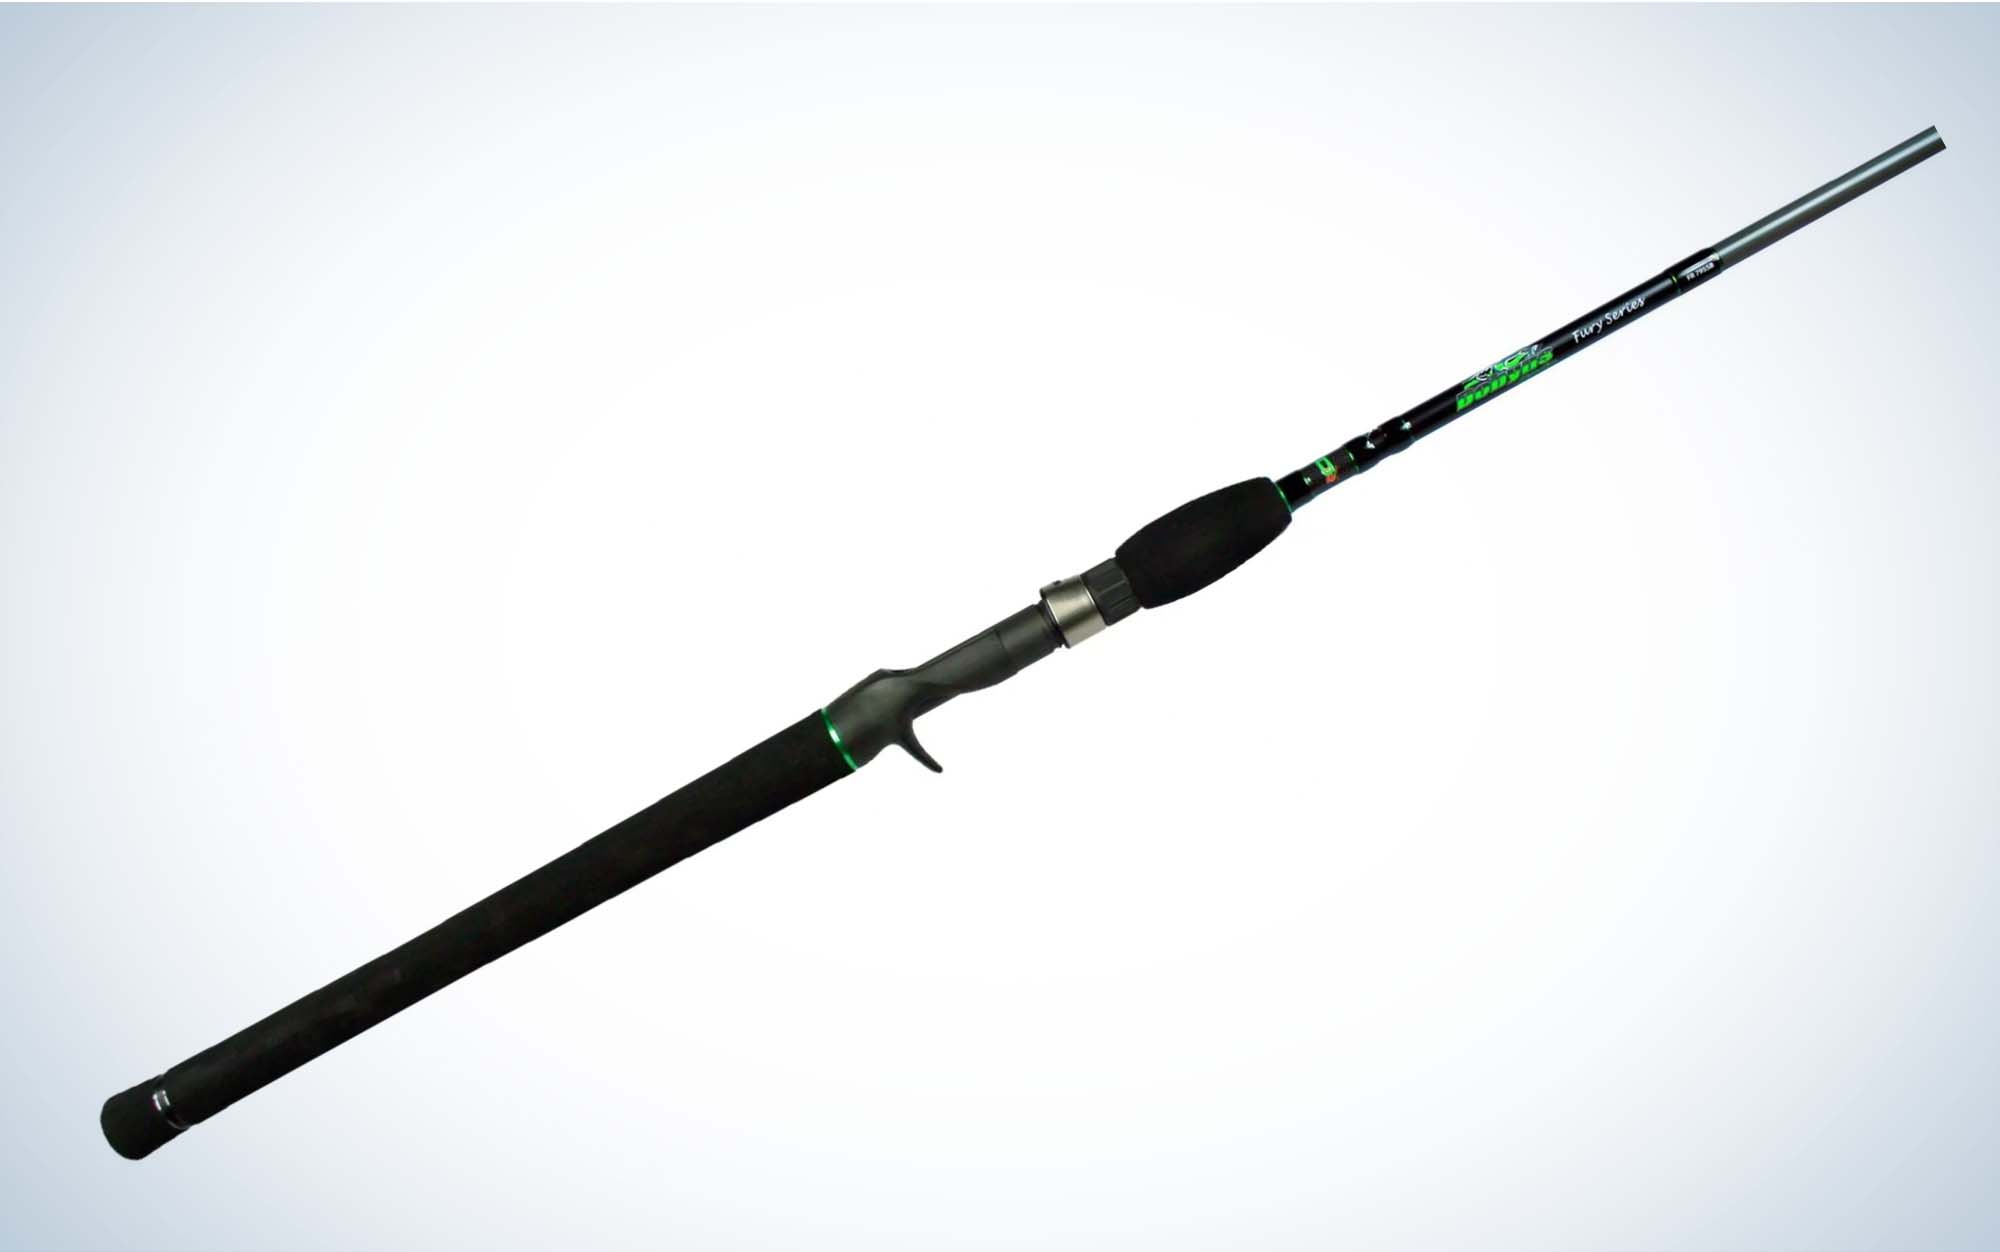 rise rods, rise rods Suppliers and Manufacturers at